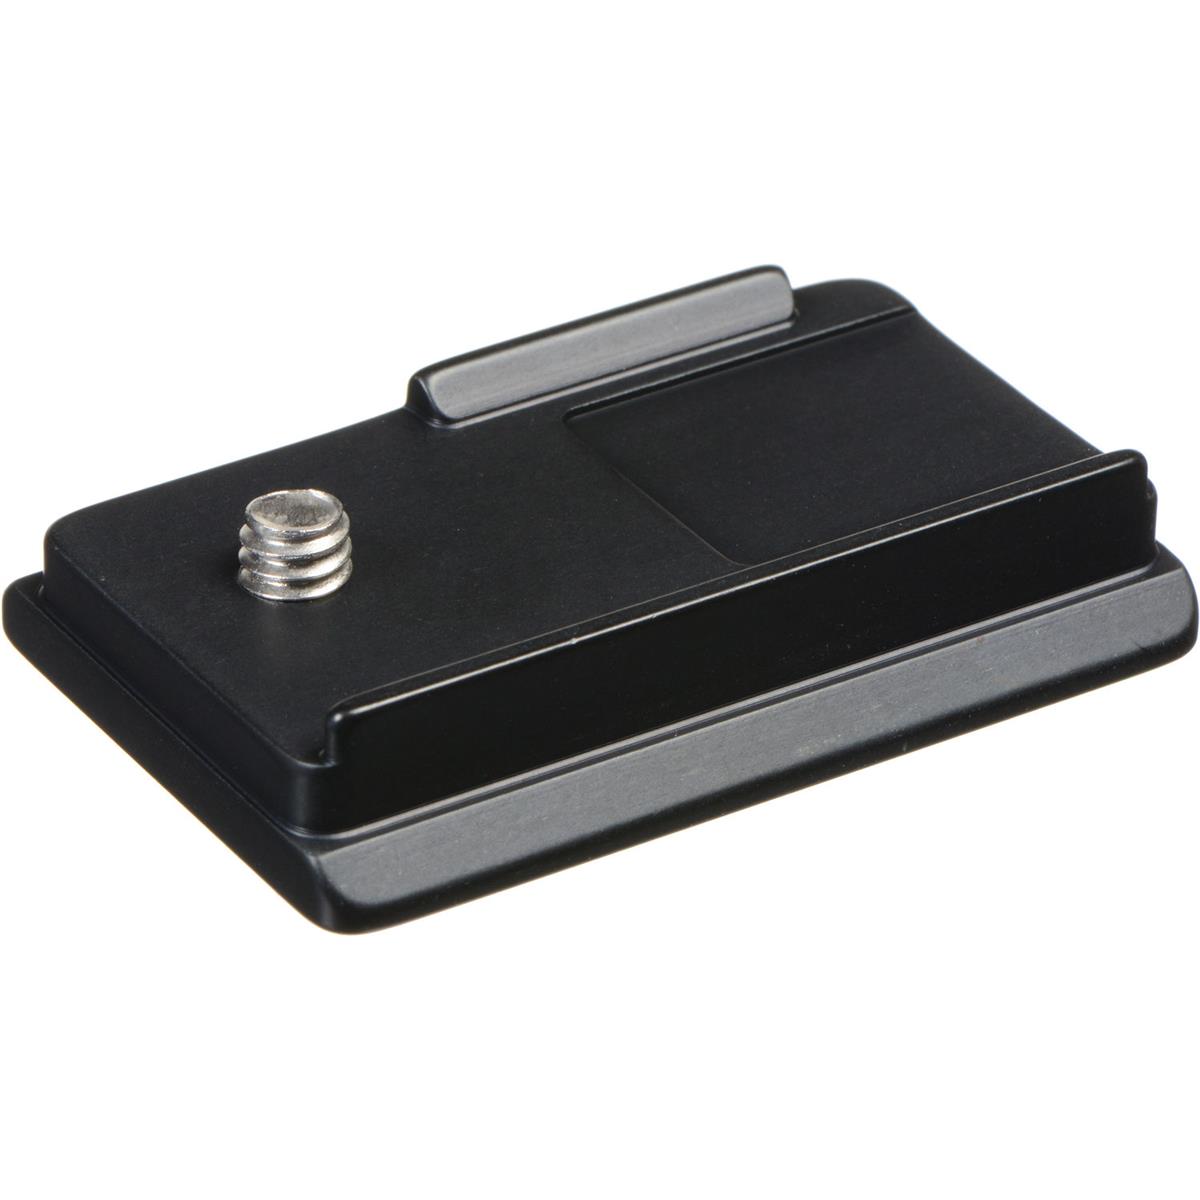 Image of Acratech Quick Release Plate for Fuji X-T1 Camera and Arca Swiss Type Clamp